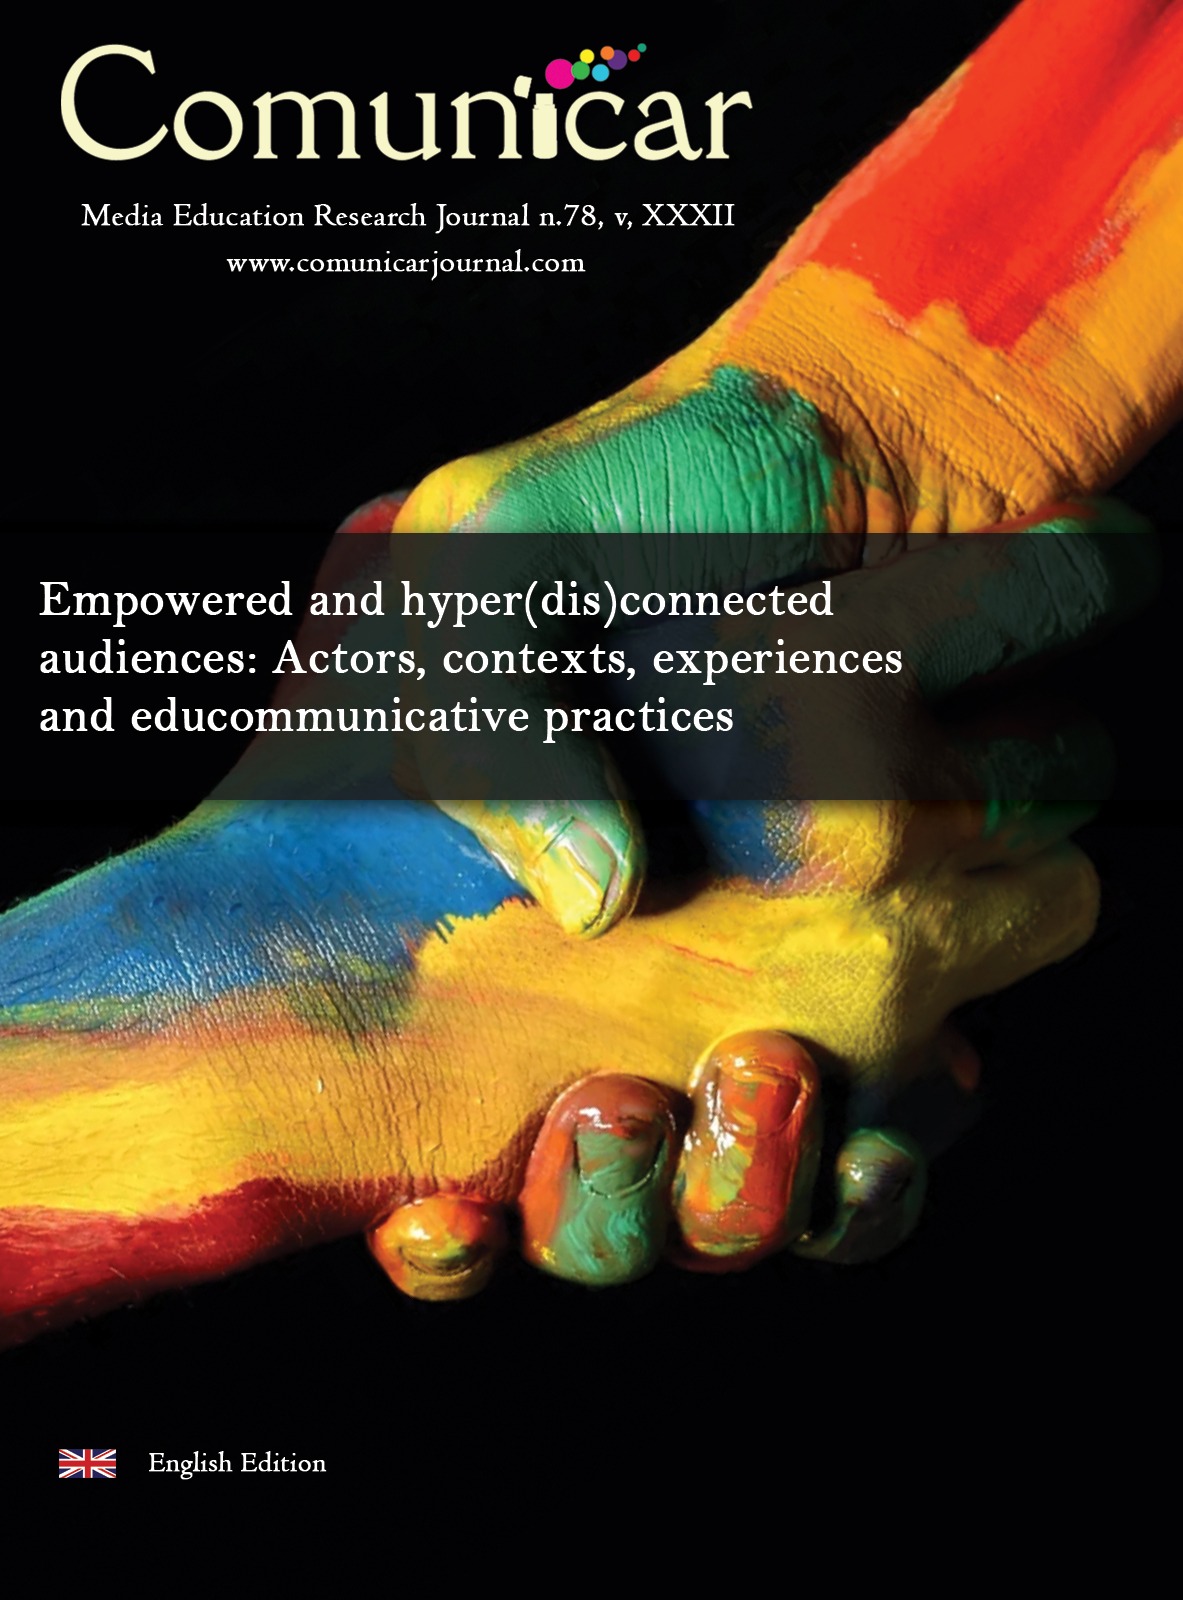 Comunicar 78: Empowered and hyper (dis)connected audiences: Actors, contexts, experiences and educommunicative  practices